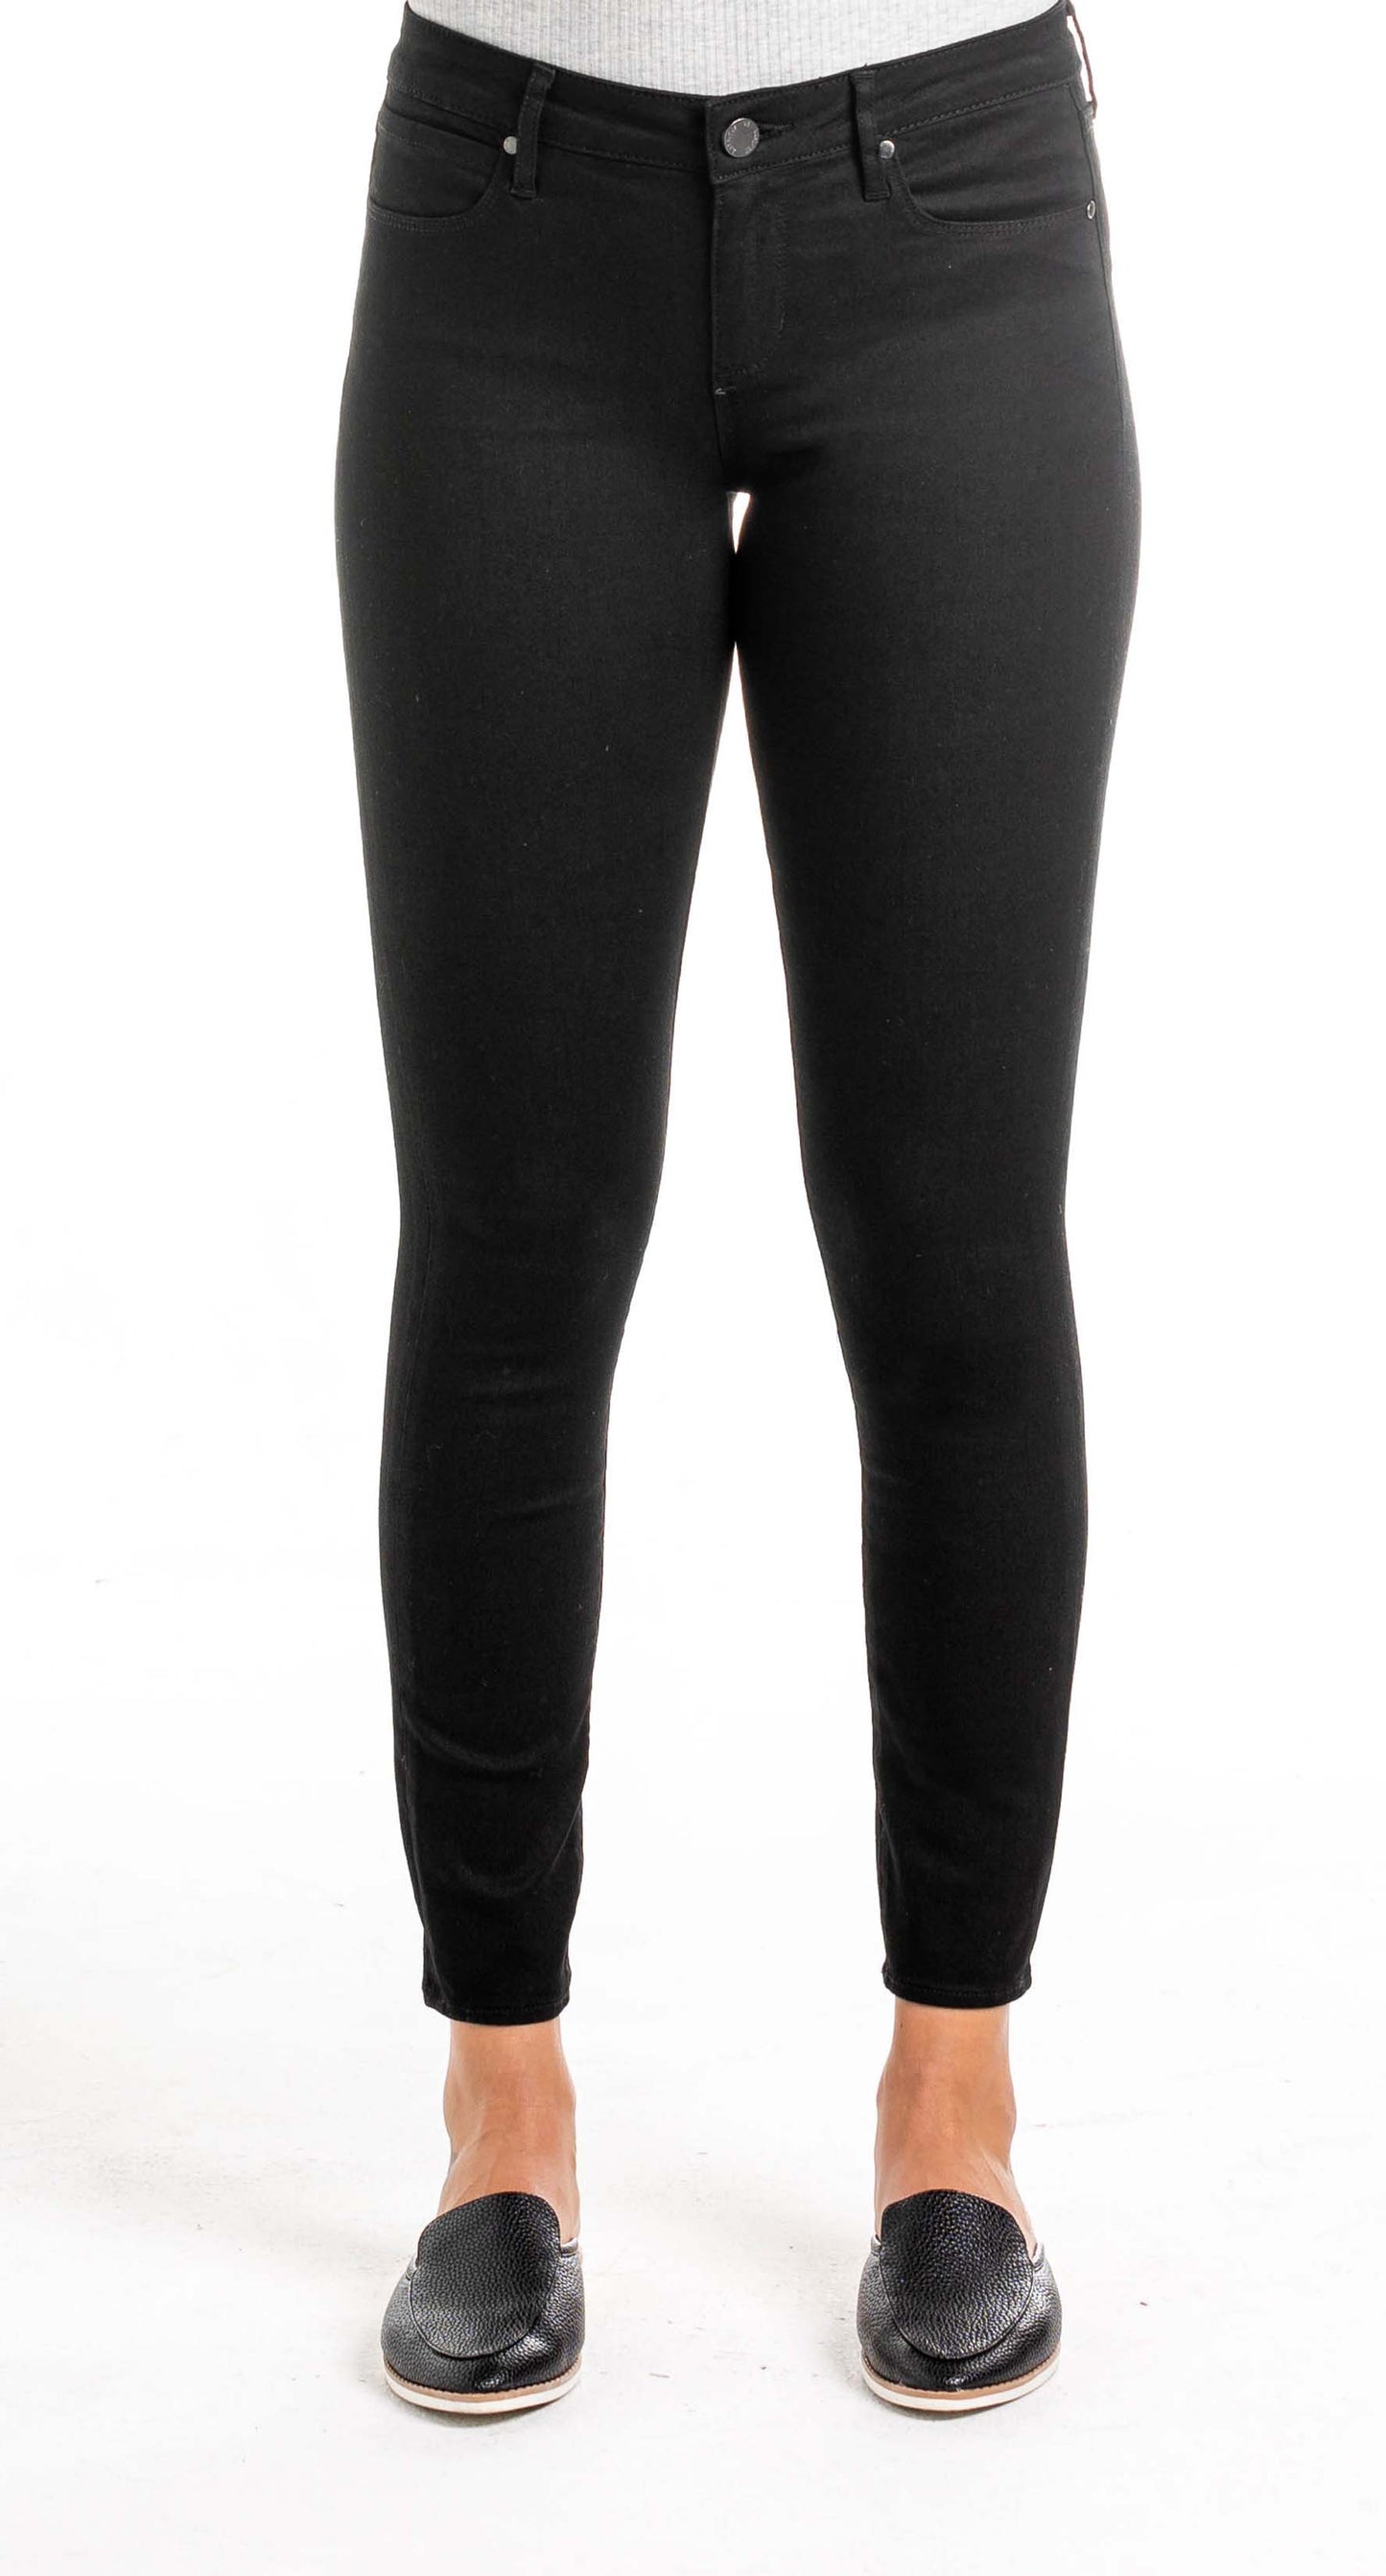 Articles of Society Sarah Mod Ankle Skinny